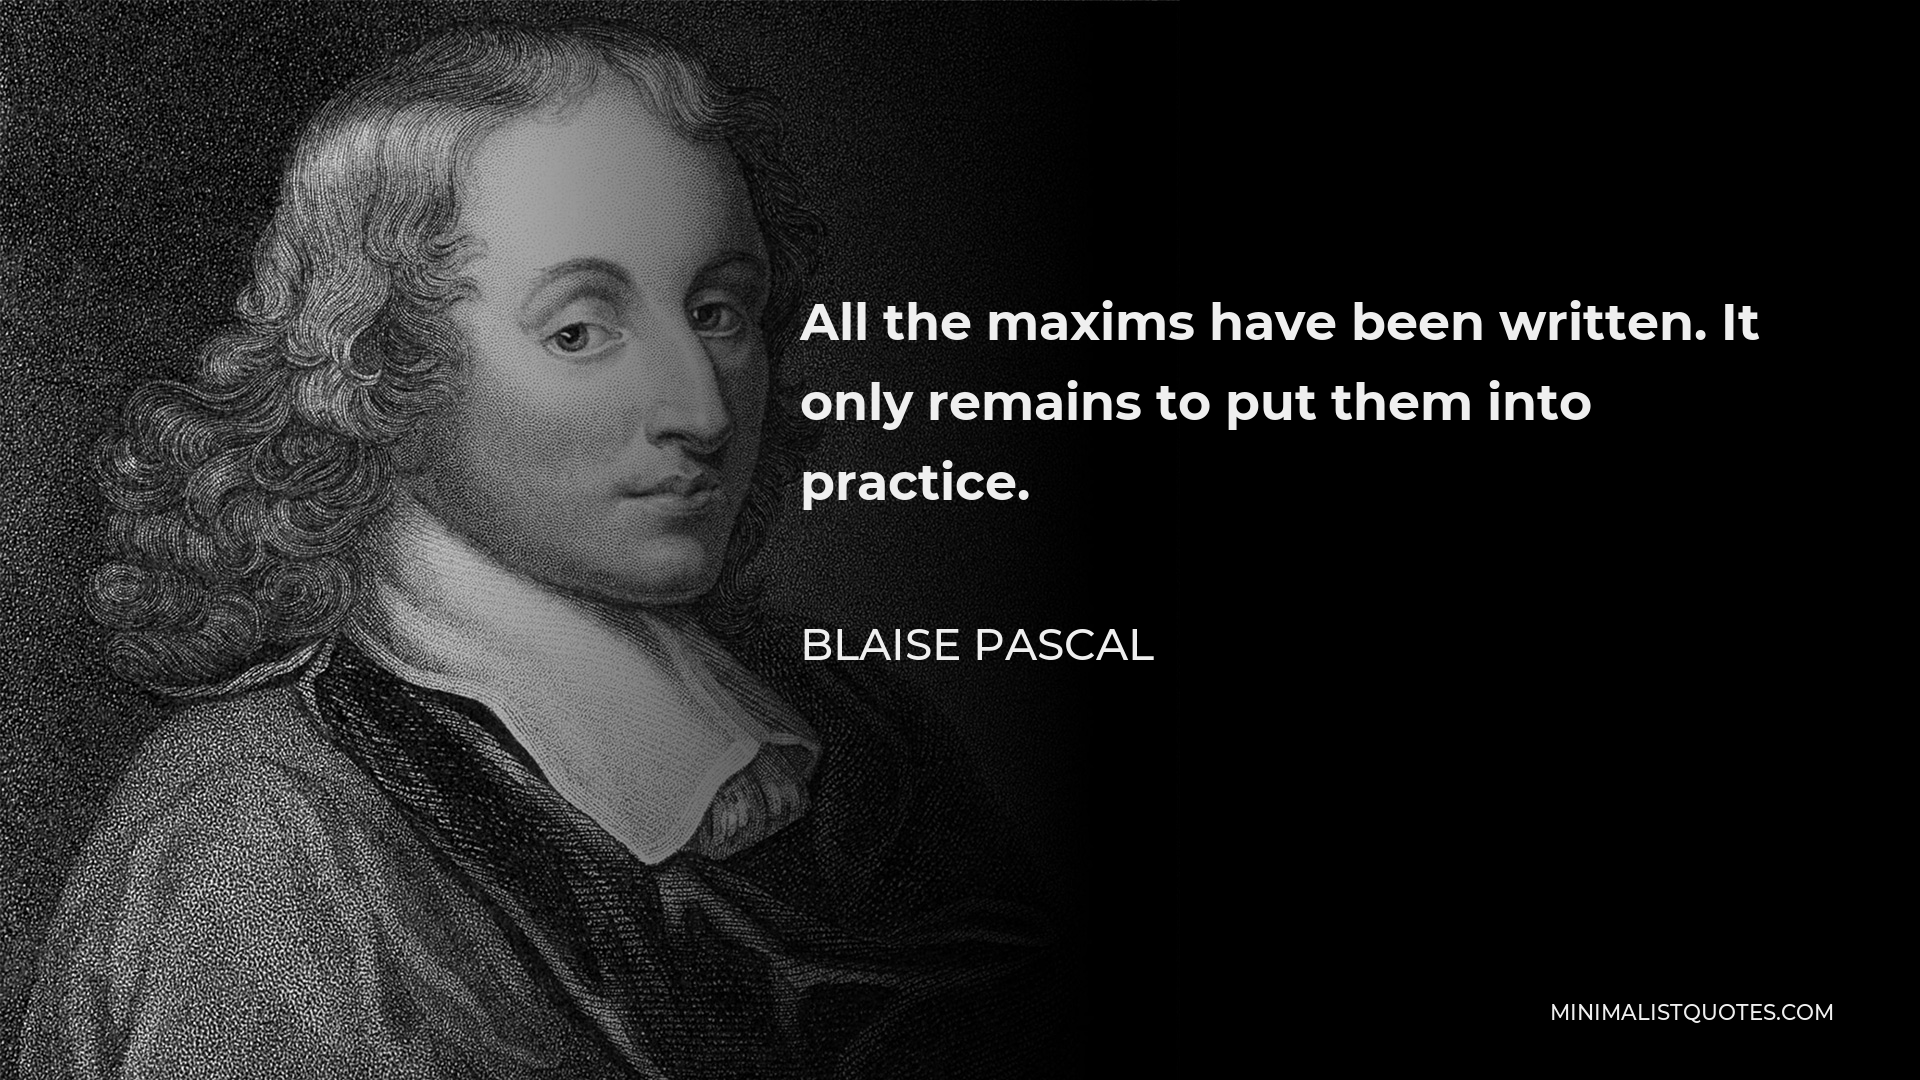 Blaise Pascal Quote - All the maxims have been written. It only remains to put them into practice.